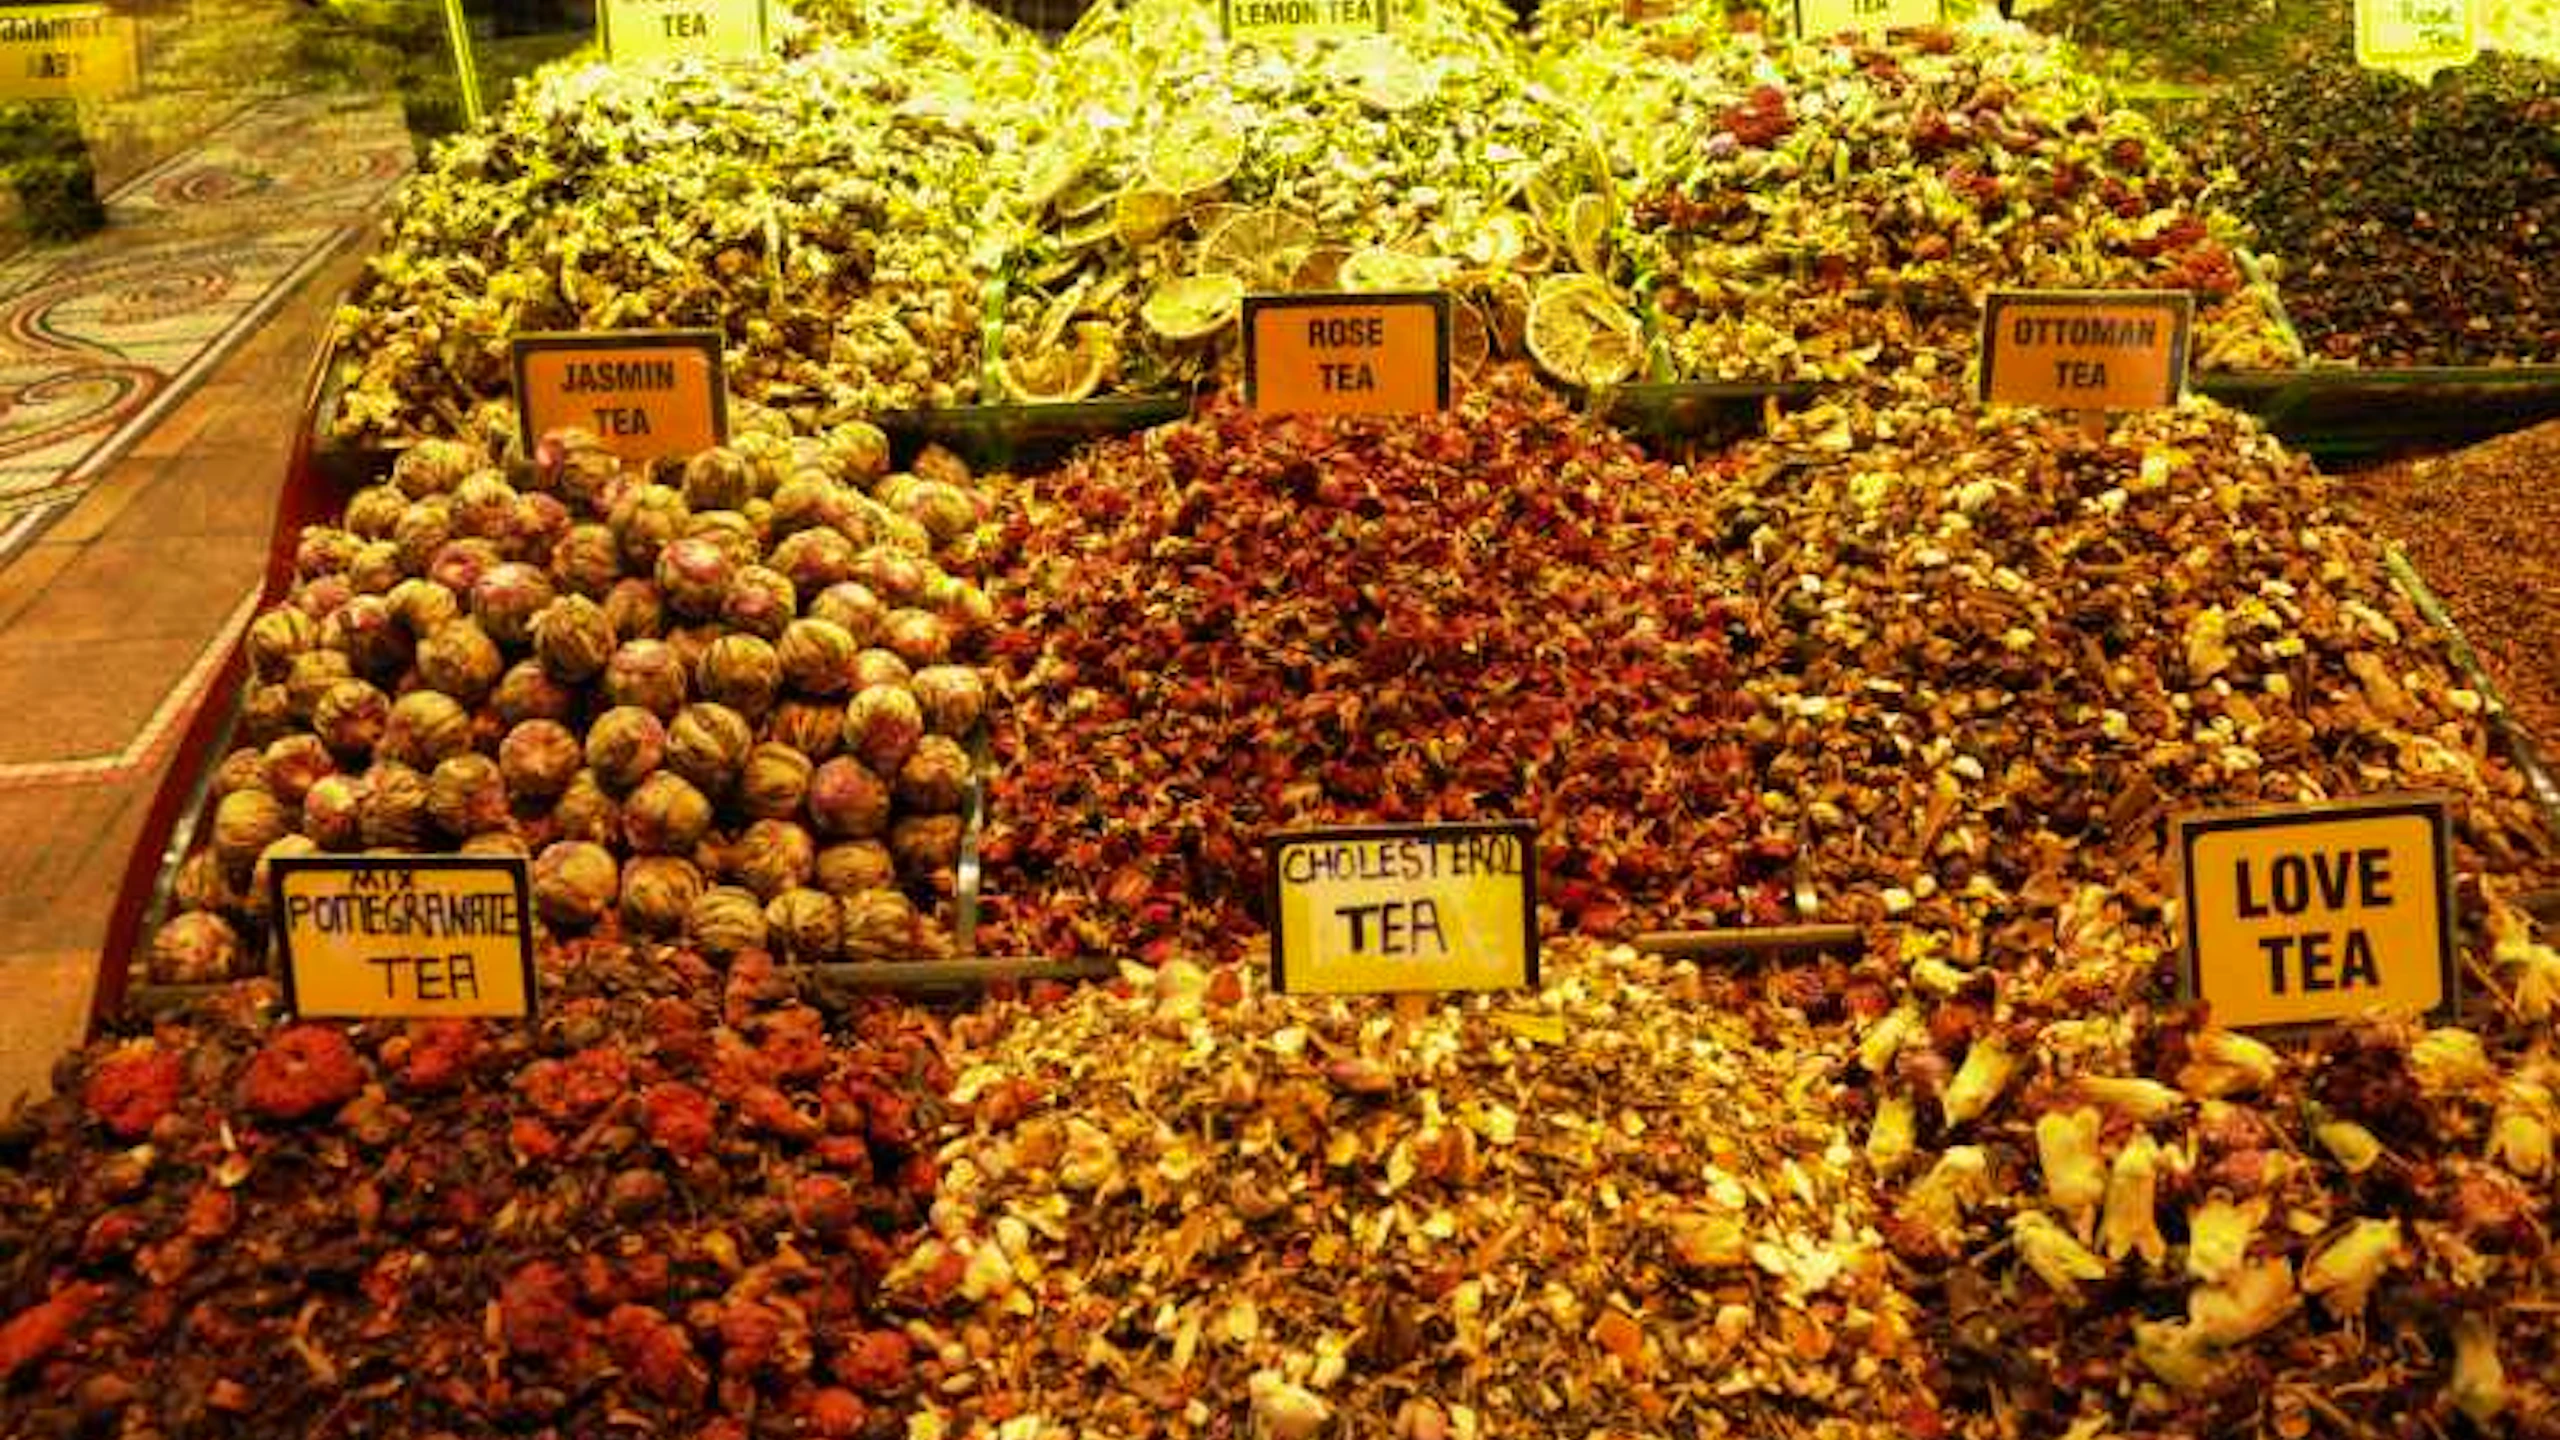 Istanbul Food and Culture Tour: Taste of 2 Continents Ticket